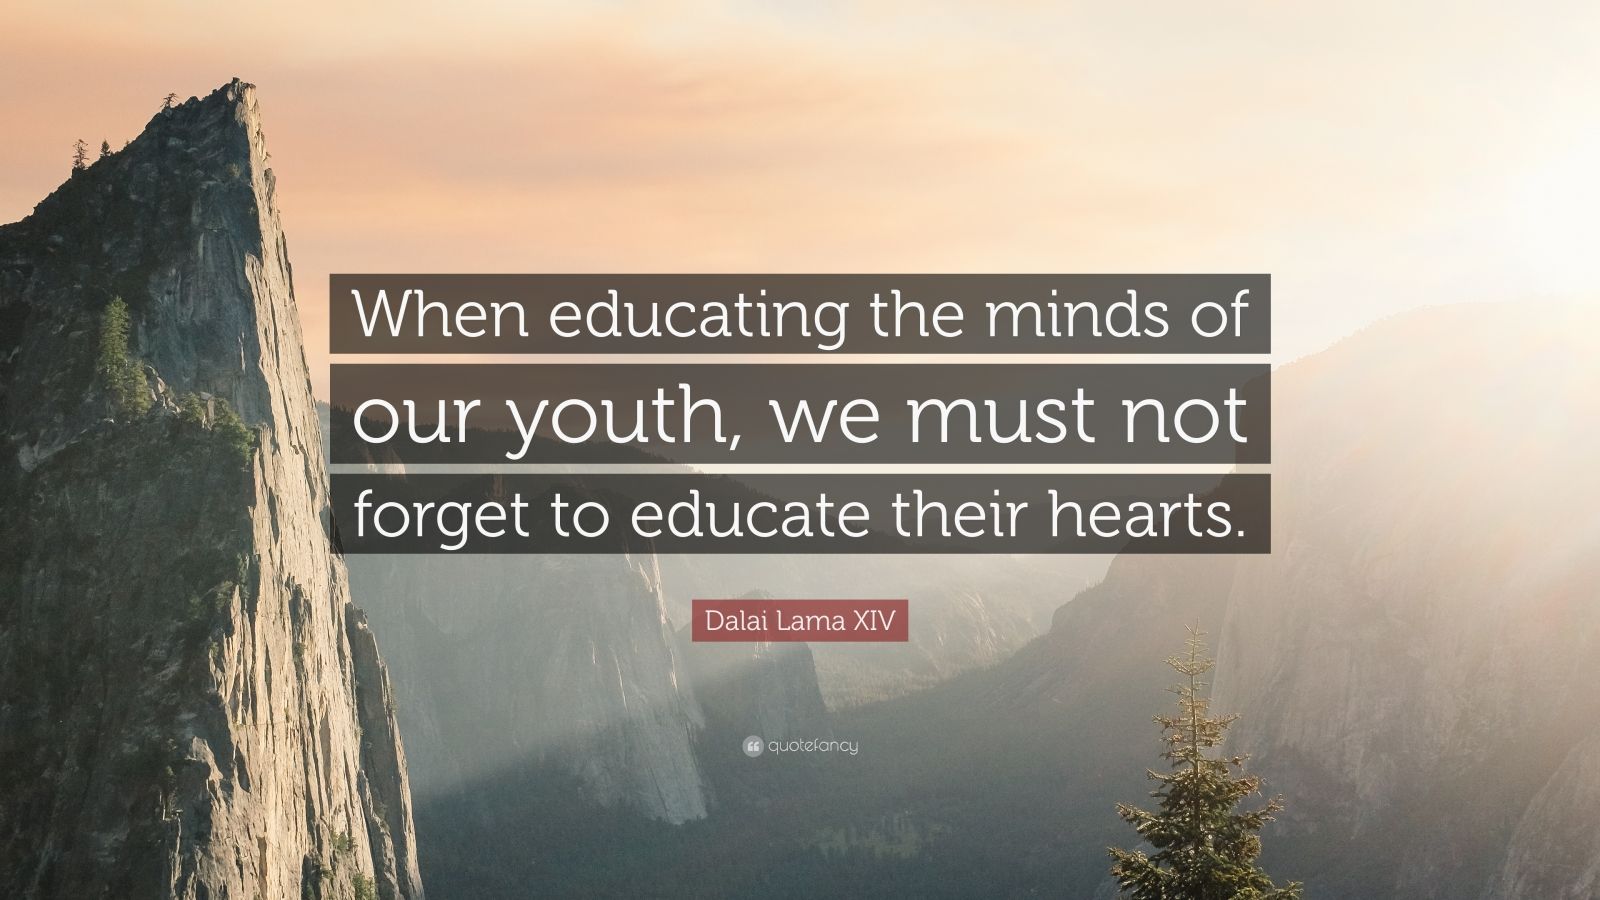 Dalai Lama XIV Quote: “When educating the minds of our youth, we must